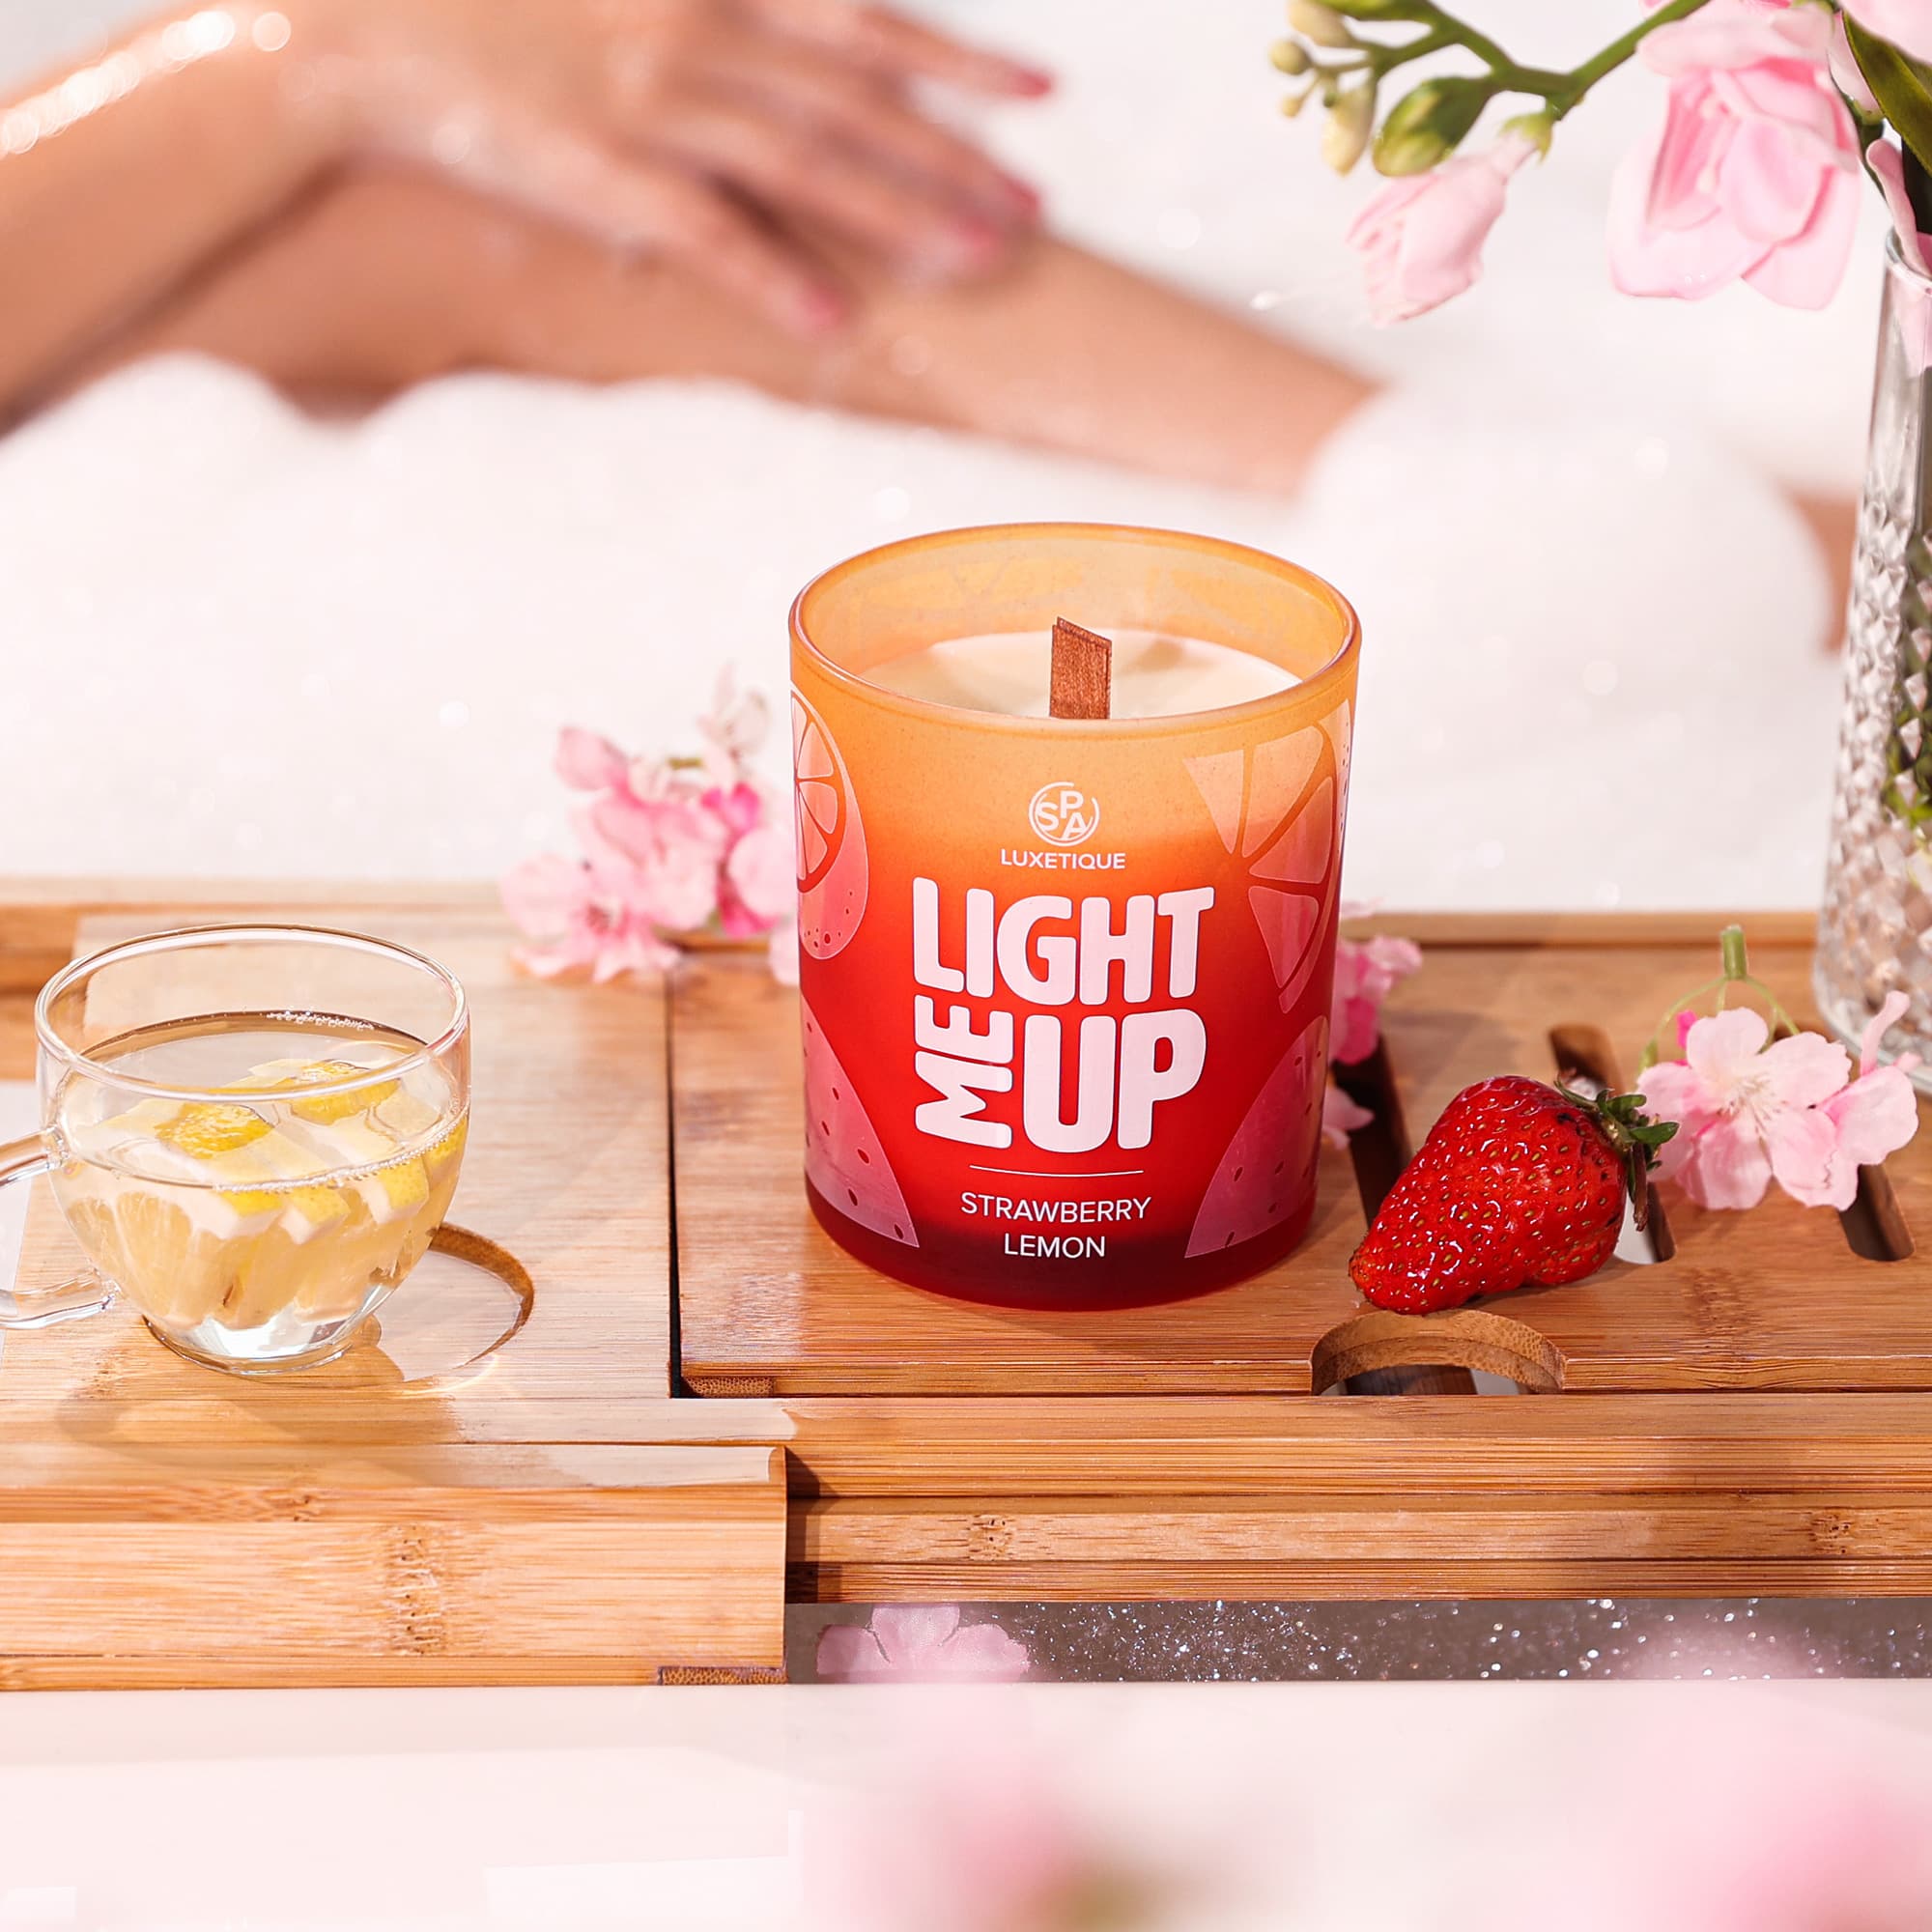 Strawberry Candle Strawberry Lemon Candles for Guests (10 Pcs) Strawberry Lemon Candle 30% OFF Comfort Fragrance Gifts Home Spa